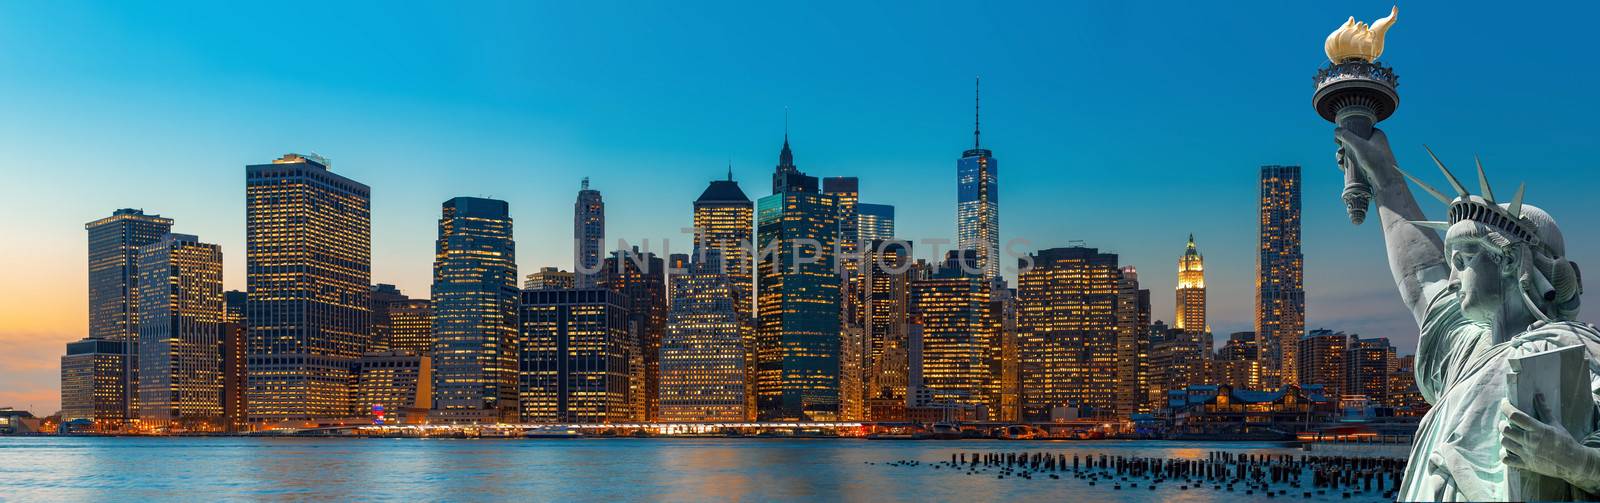 Evening New York City skyline panorama and The Statue of Liberty